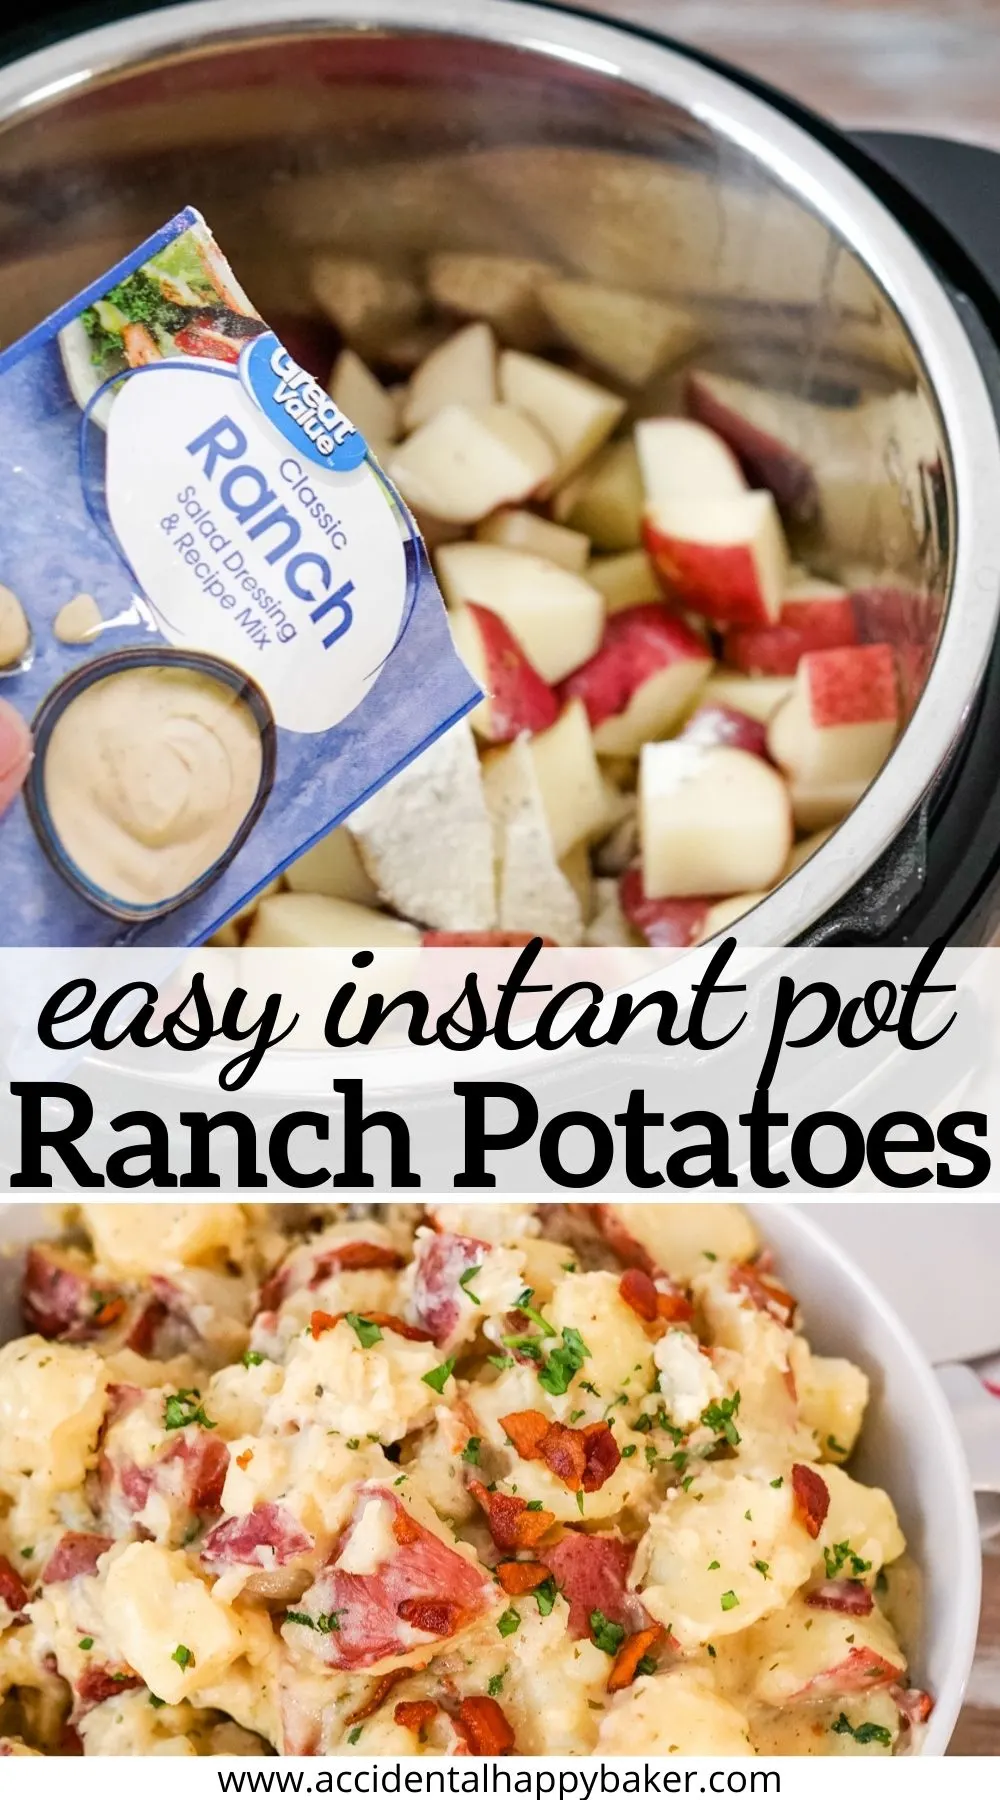 Instant Pot Ranch Potatoes combine creamy red potatoes, ranch dressing and bacon for a quick and easy side dish that’s ready in a flash!